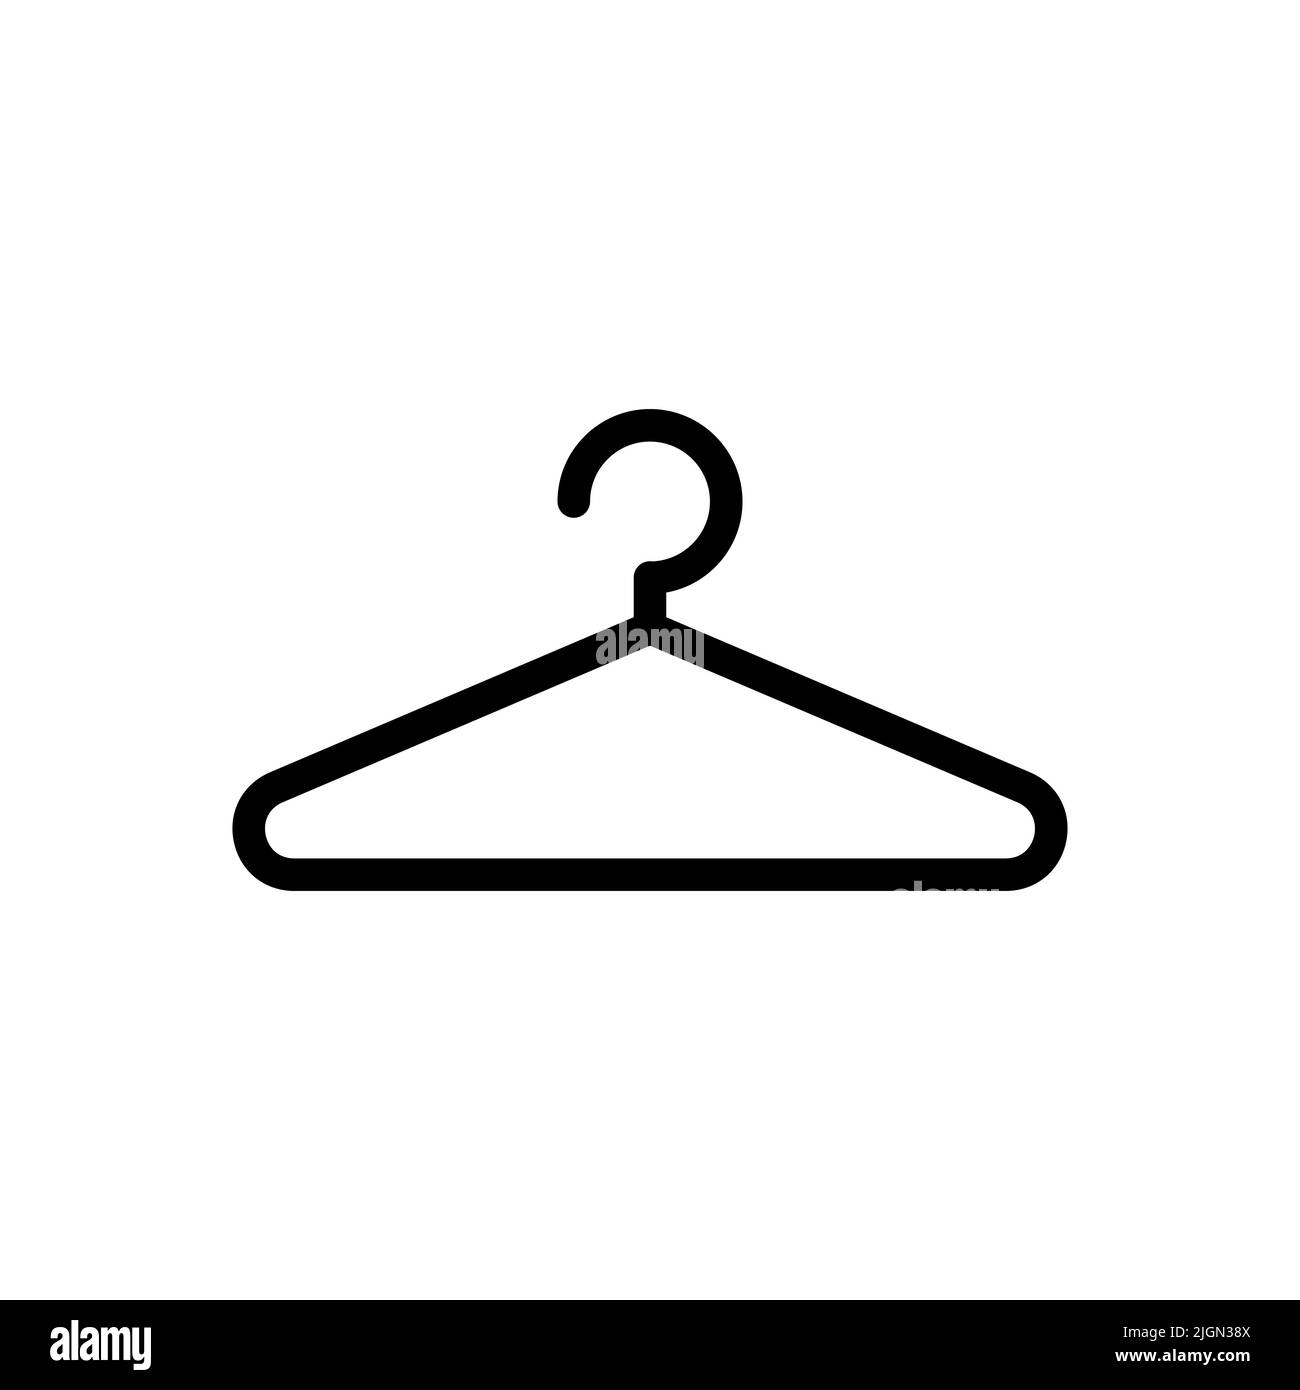 Clothes hanger. Hanger icon vector isolated on white background Stock Vector